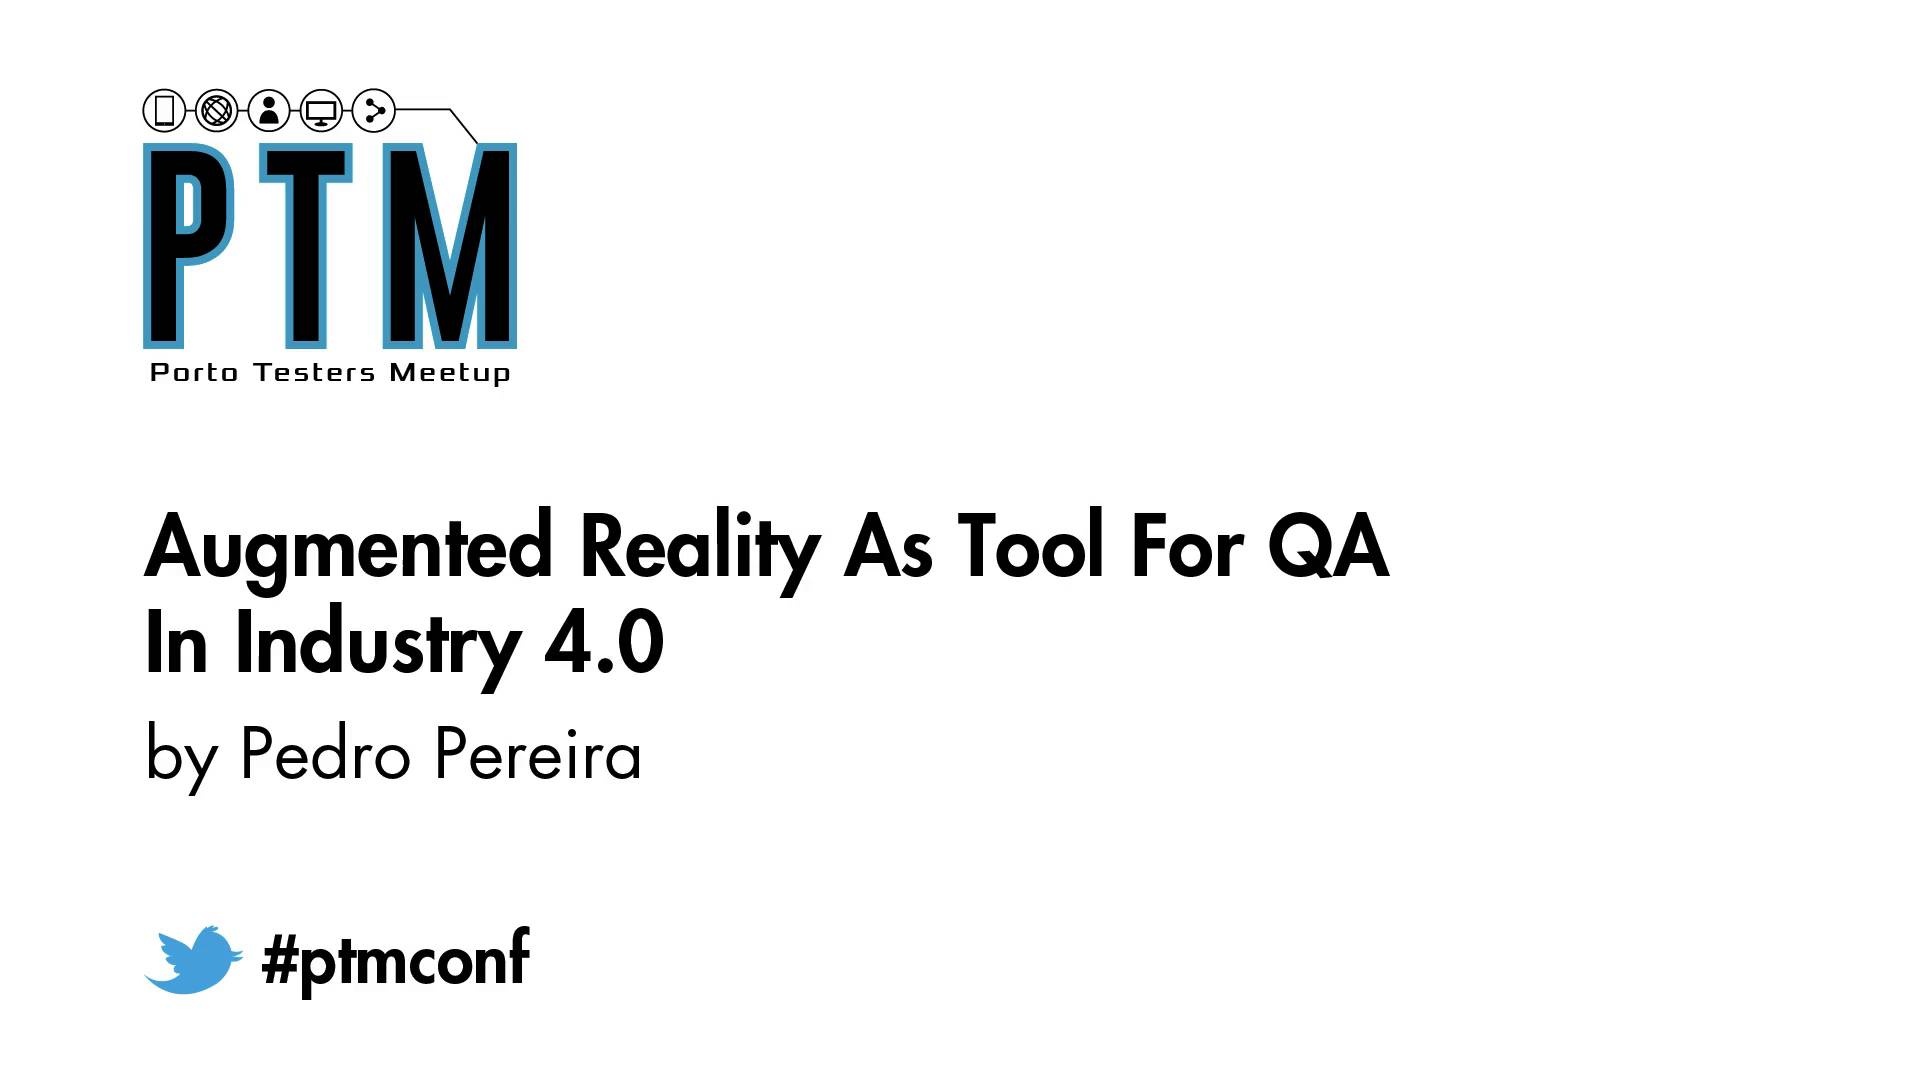 Augmented Reality as tool for QA in Industry 4.0 - Pedro Pereira